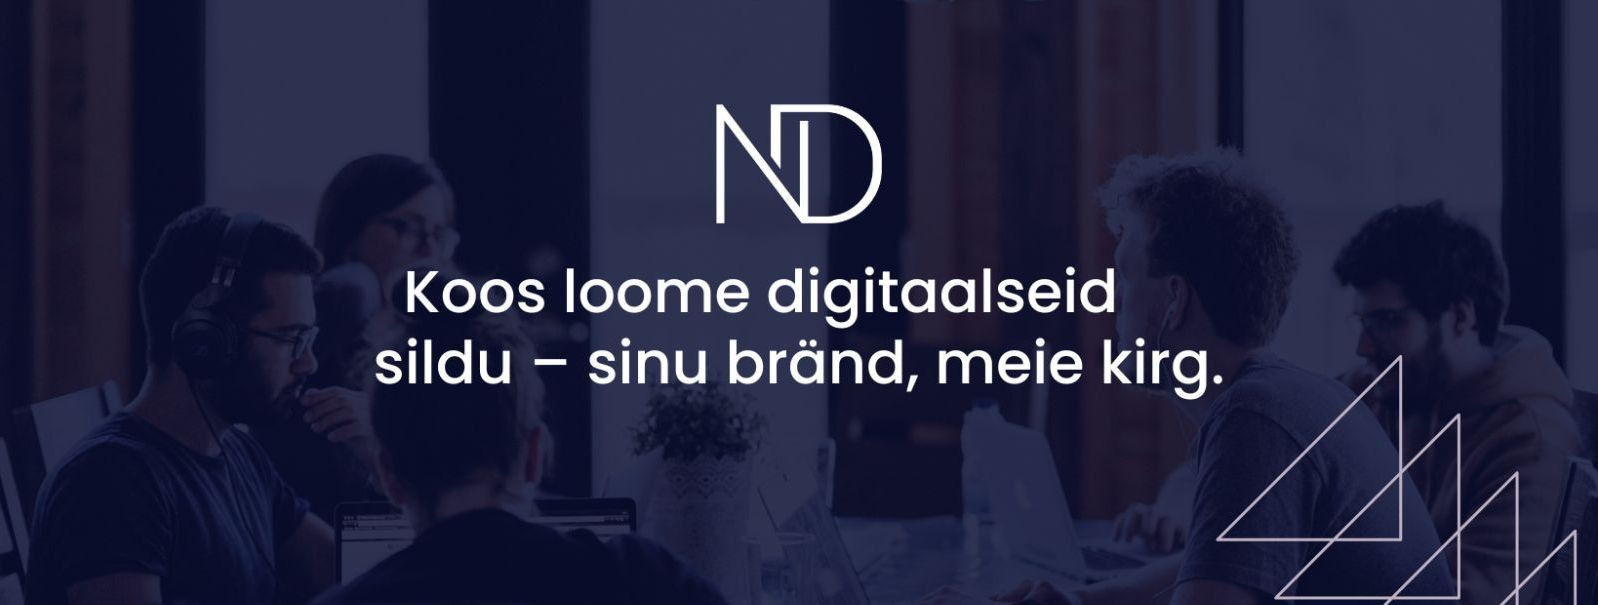 Welcome to the digital era, where the only constant is change. At NORDigital OÜ, we embrace this ever-evolving landscape with a passion for innovation and a com